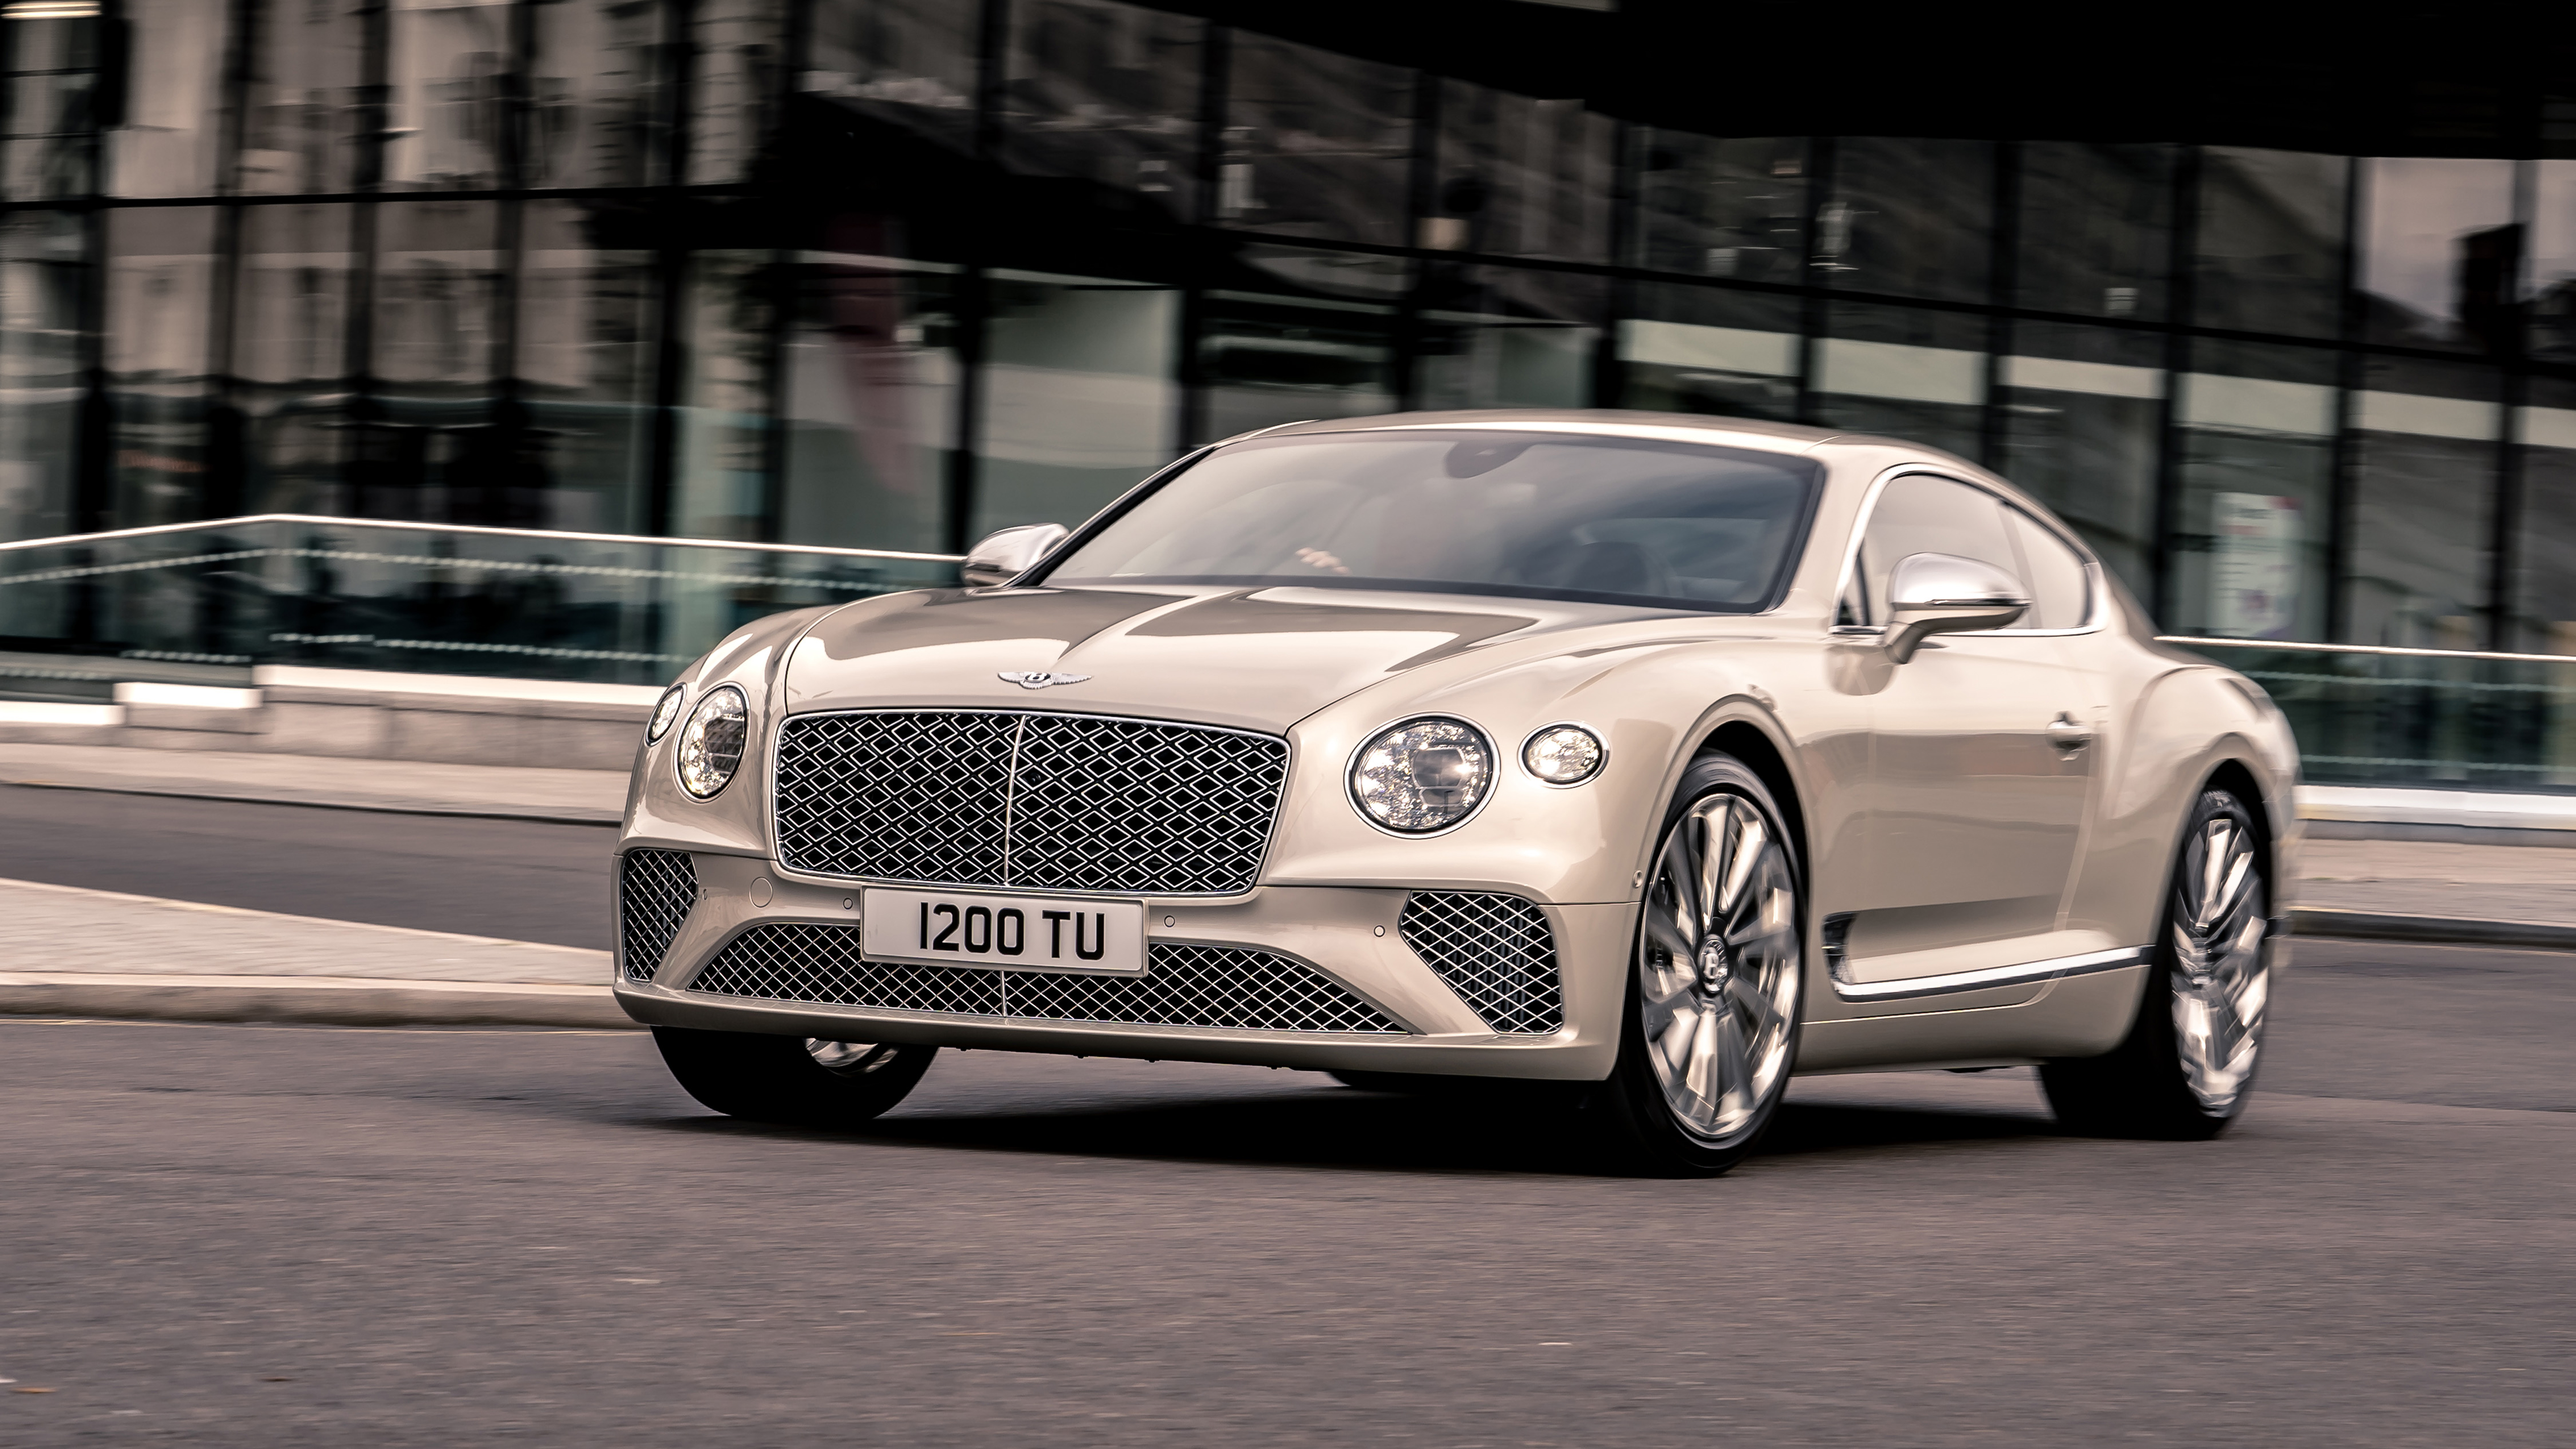 Bentley Continental GT Mulliner 2020 4K HD Cars Wallpapers  HD Wallpapers   ID 44867